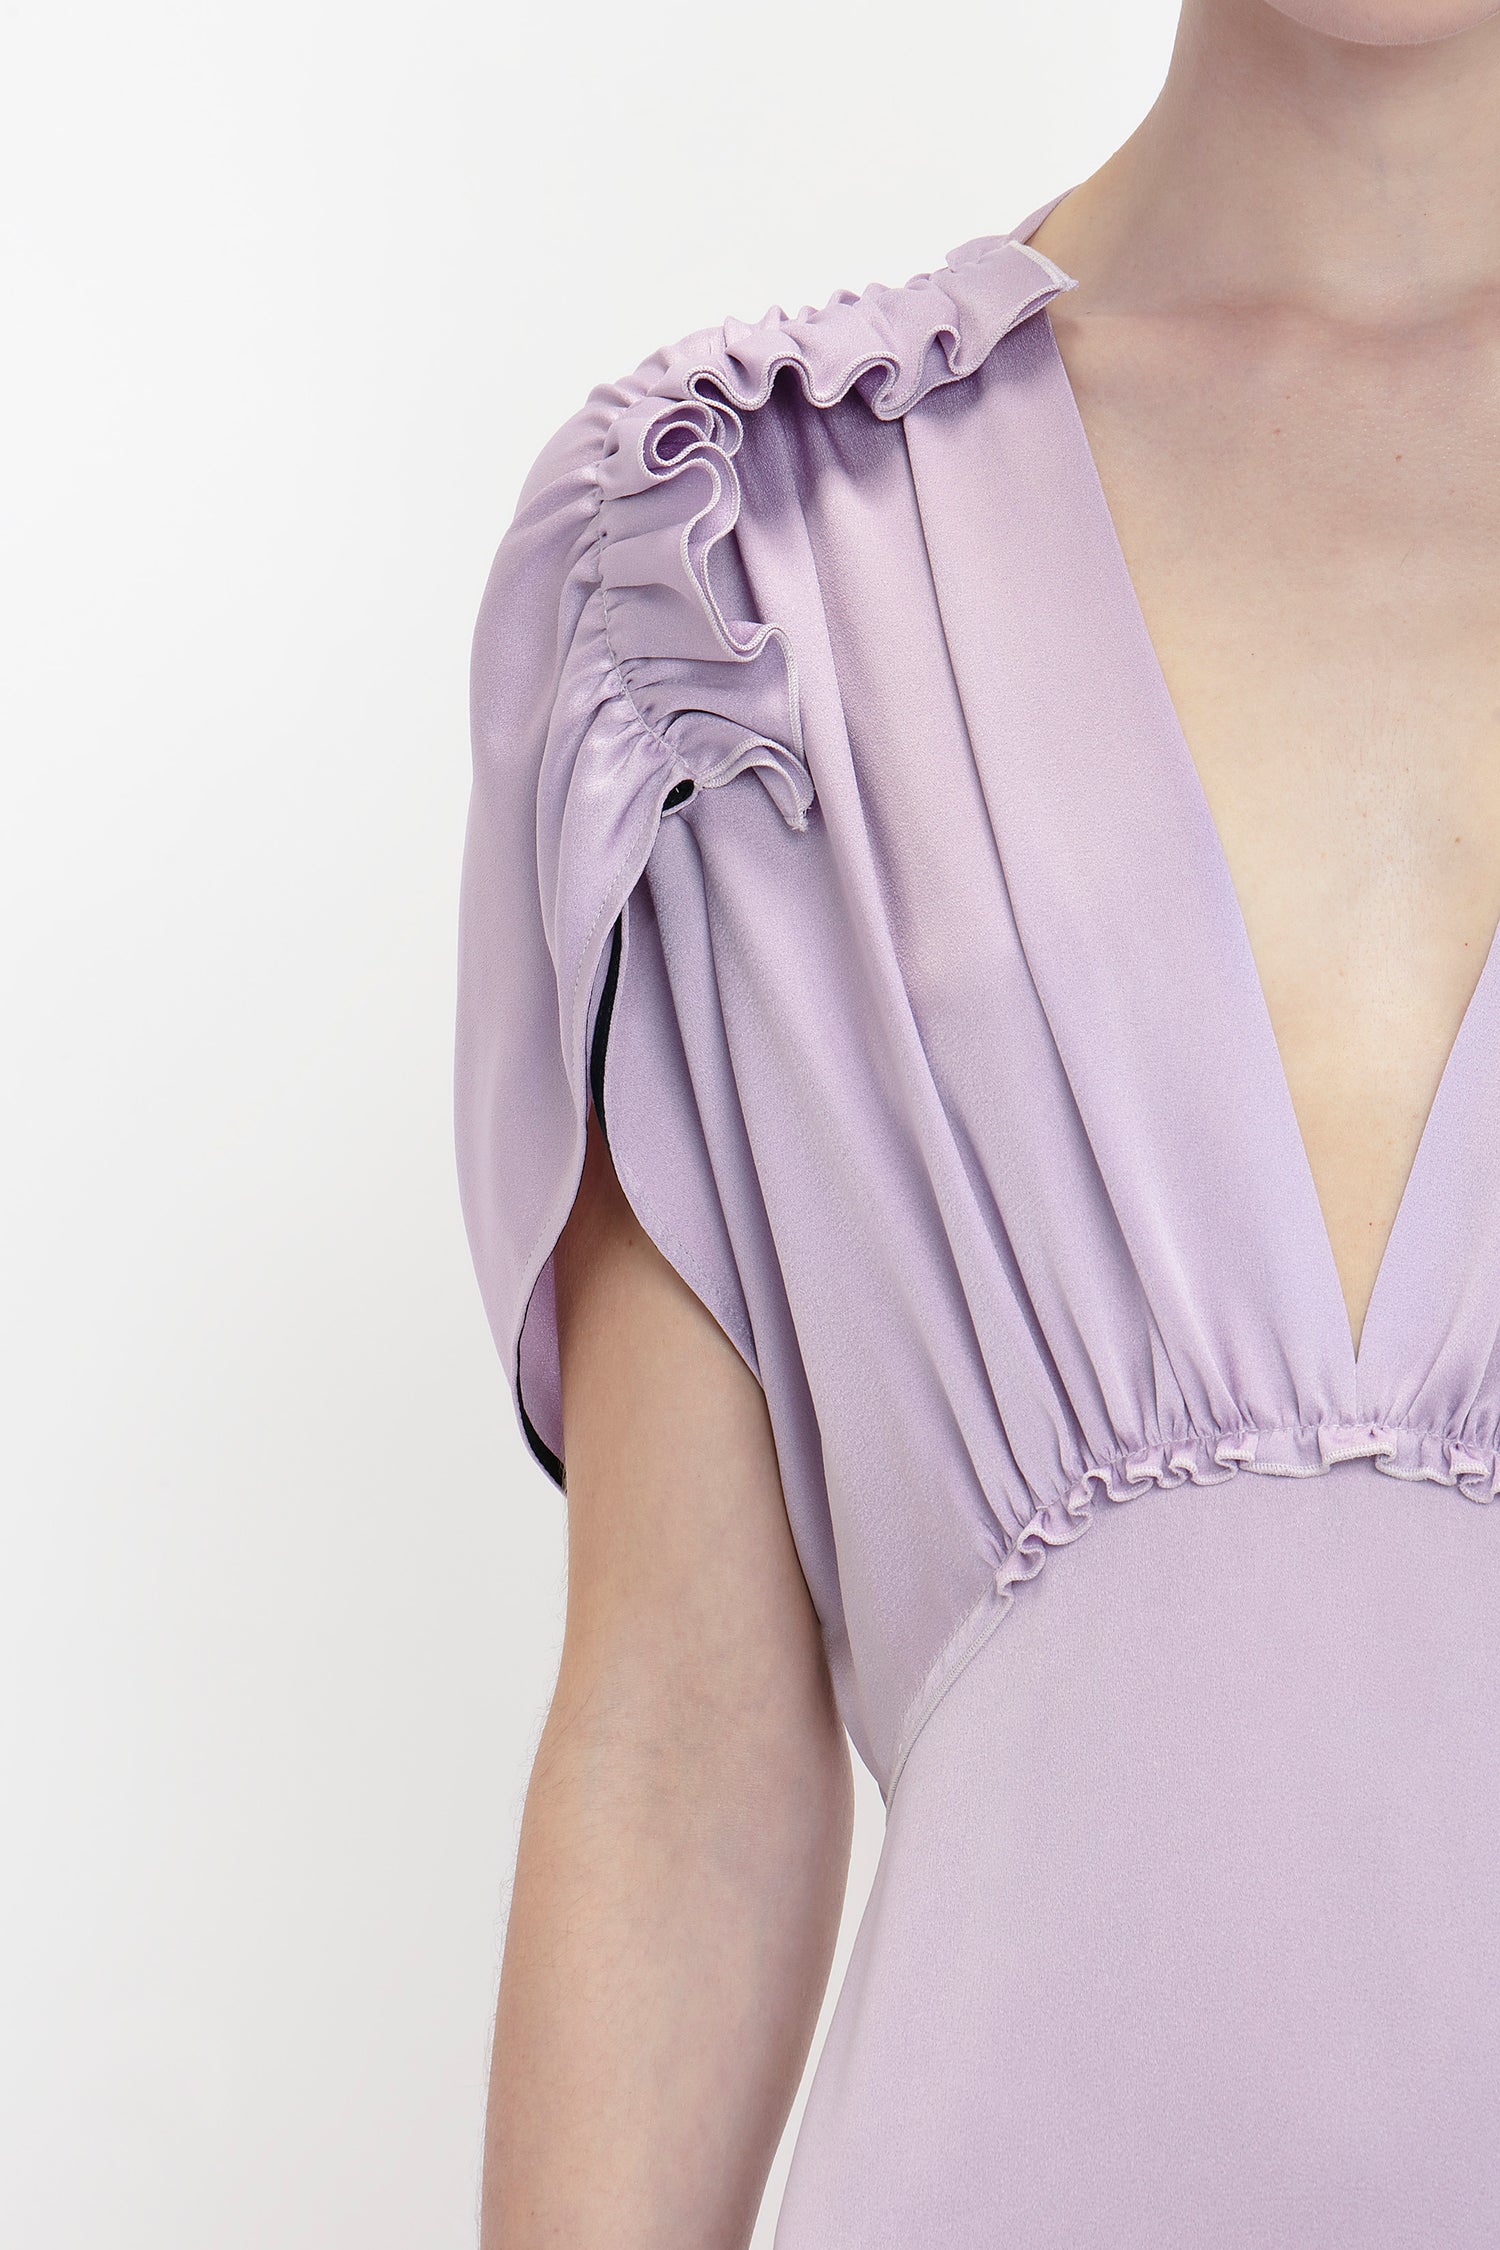 Close-up of a person wearing a V-Neck Ruffle Midi Dress In Petunia with ruffled shoulders and deep V-neckline. The Victoria Beckham brand dress fabric appears soft and has gathered detailing below the shoulder, epitomizing elegant dresses.